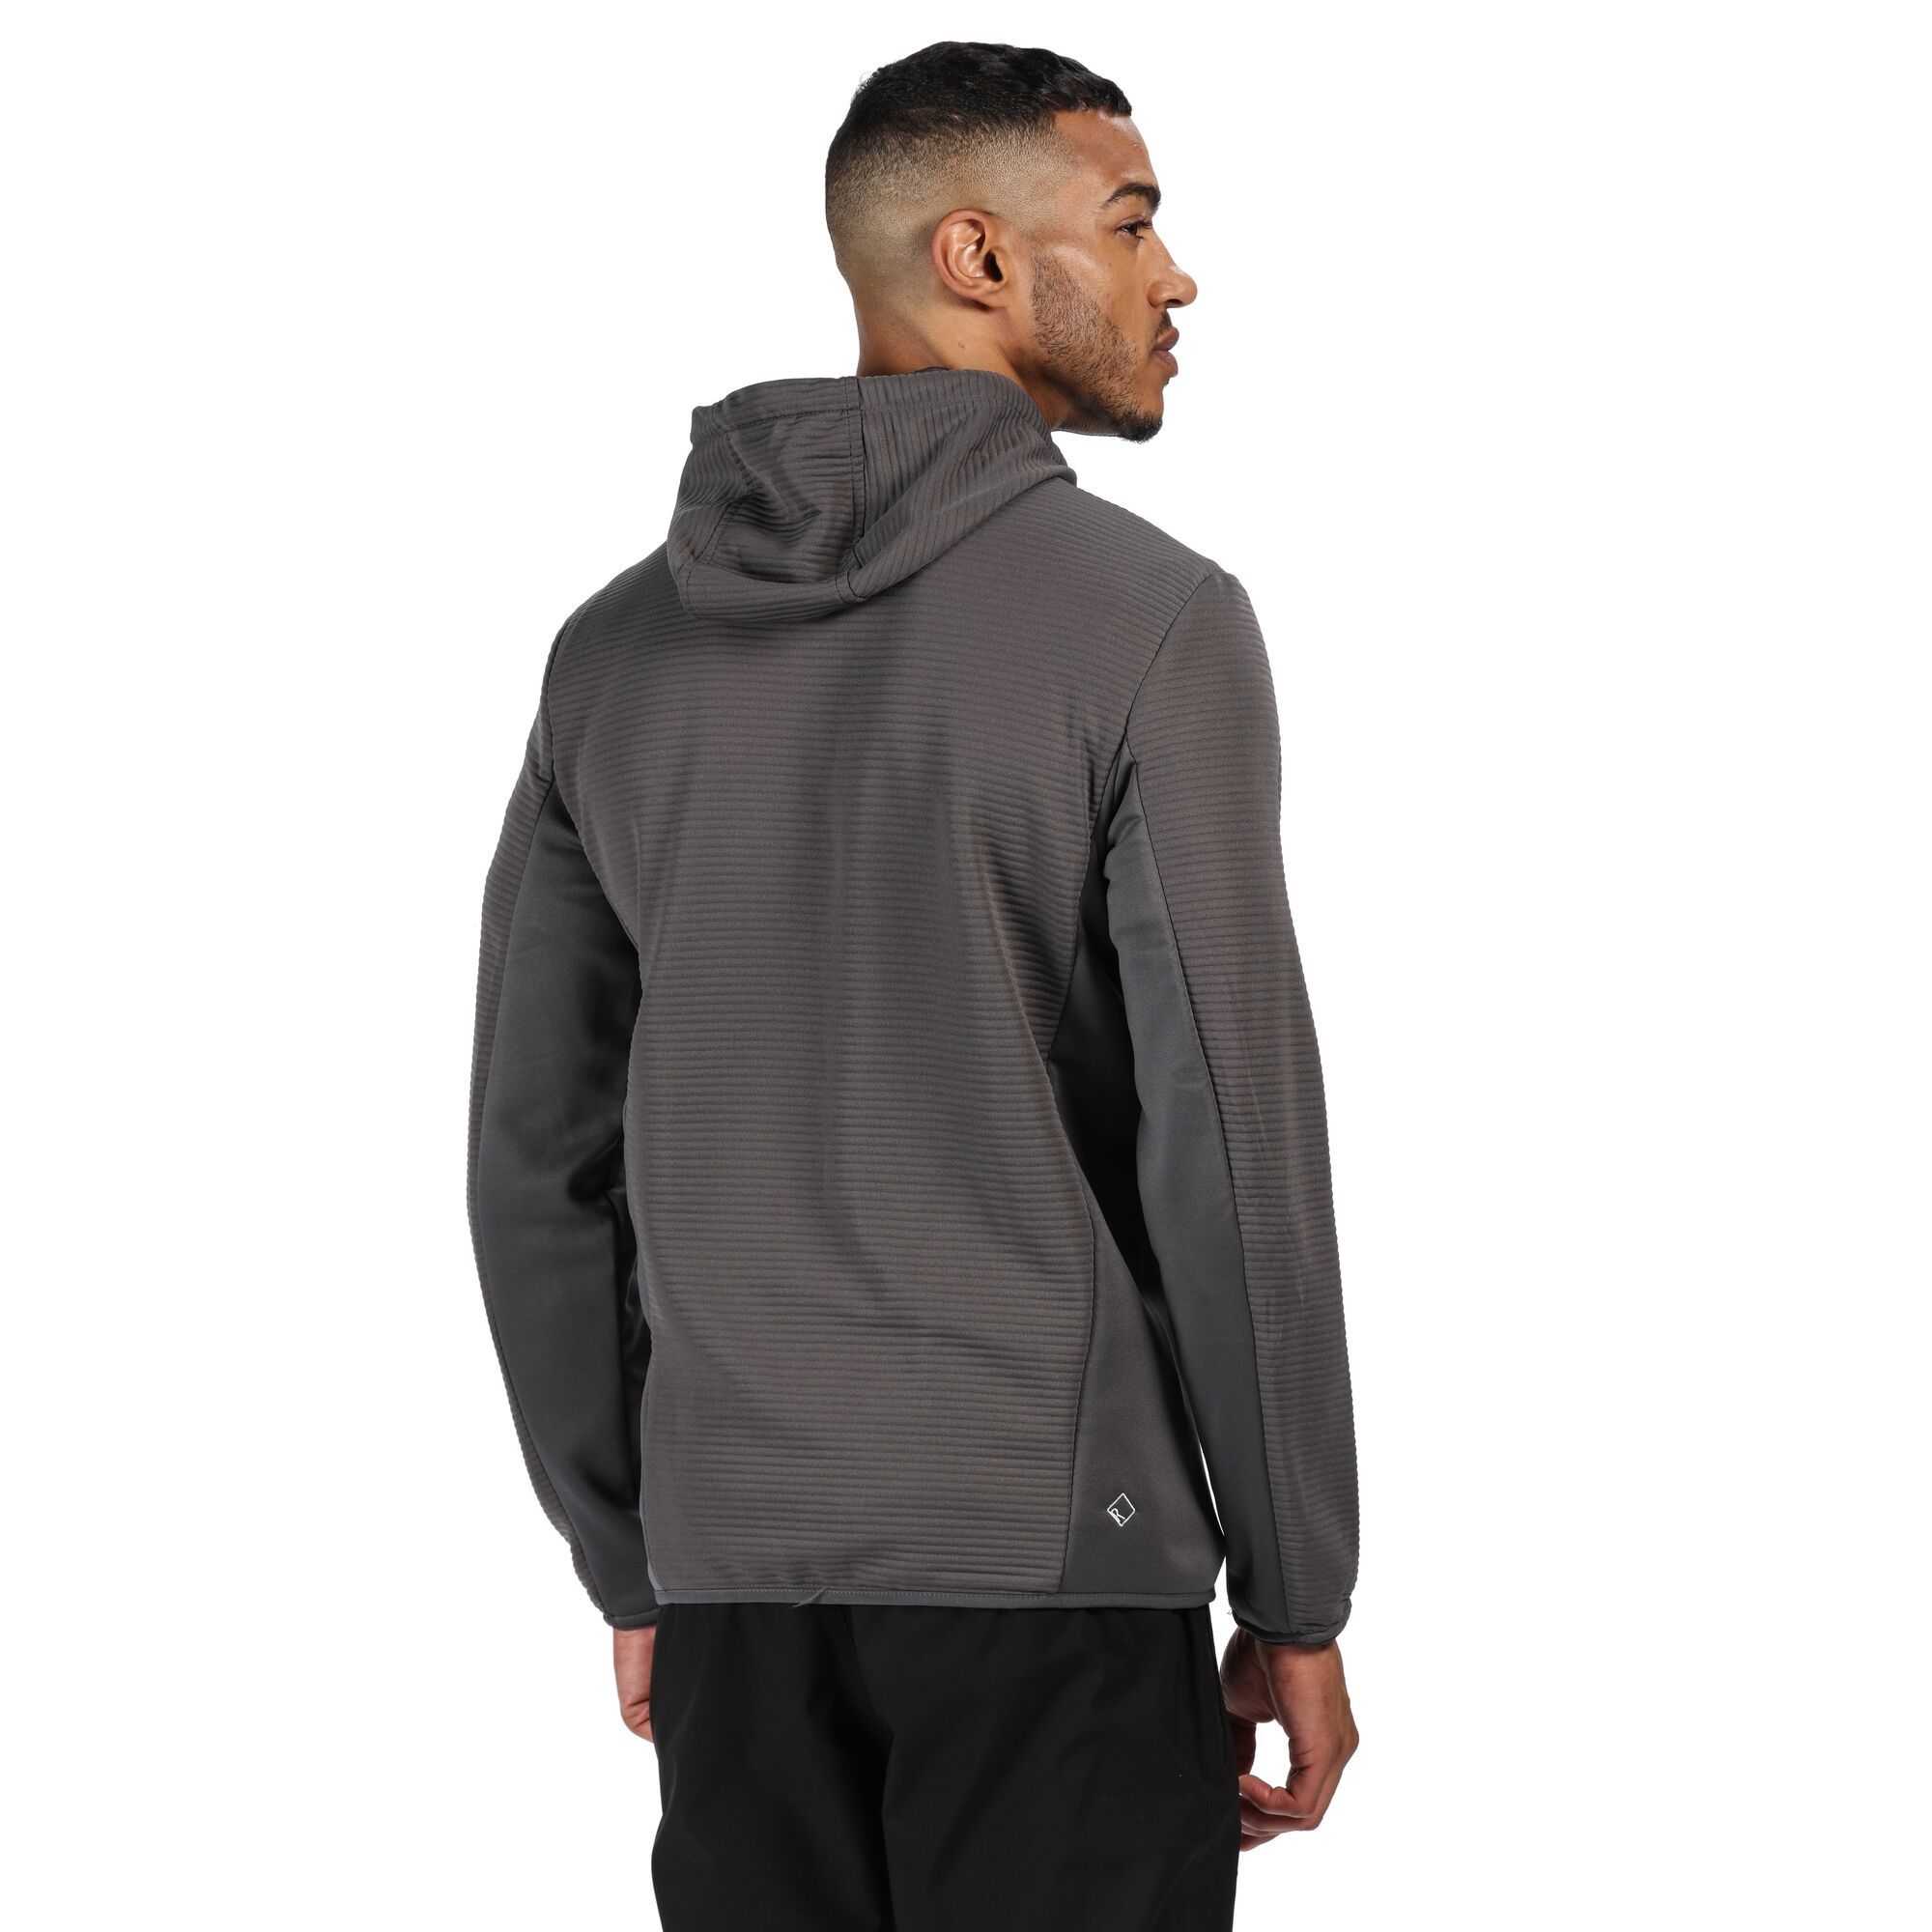 Material: 90% polyester, 10% elastane. Ribbed fabric. Grown on hood. Extol stretch side and underarm panels. 2 zipped lower pockets. Stretch binding to cuffs and hem.